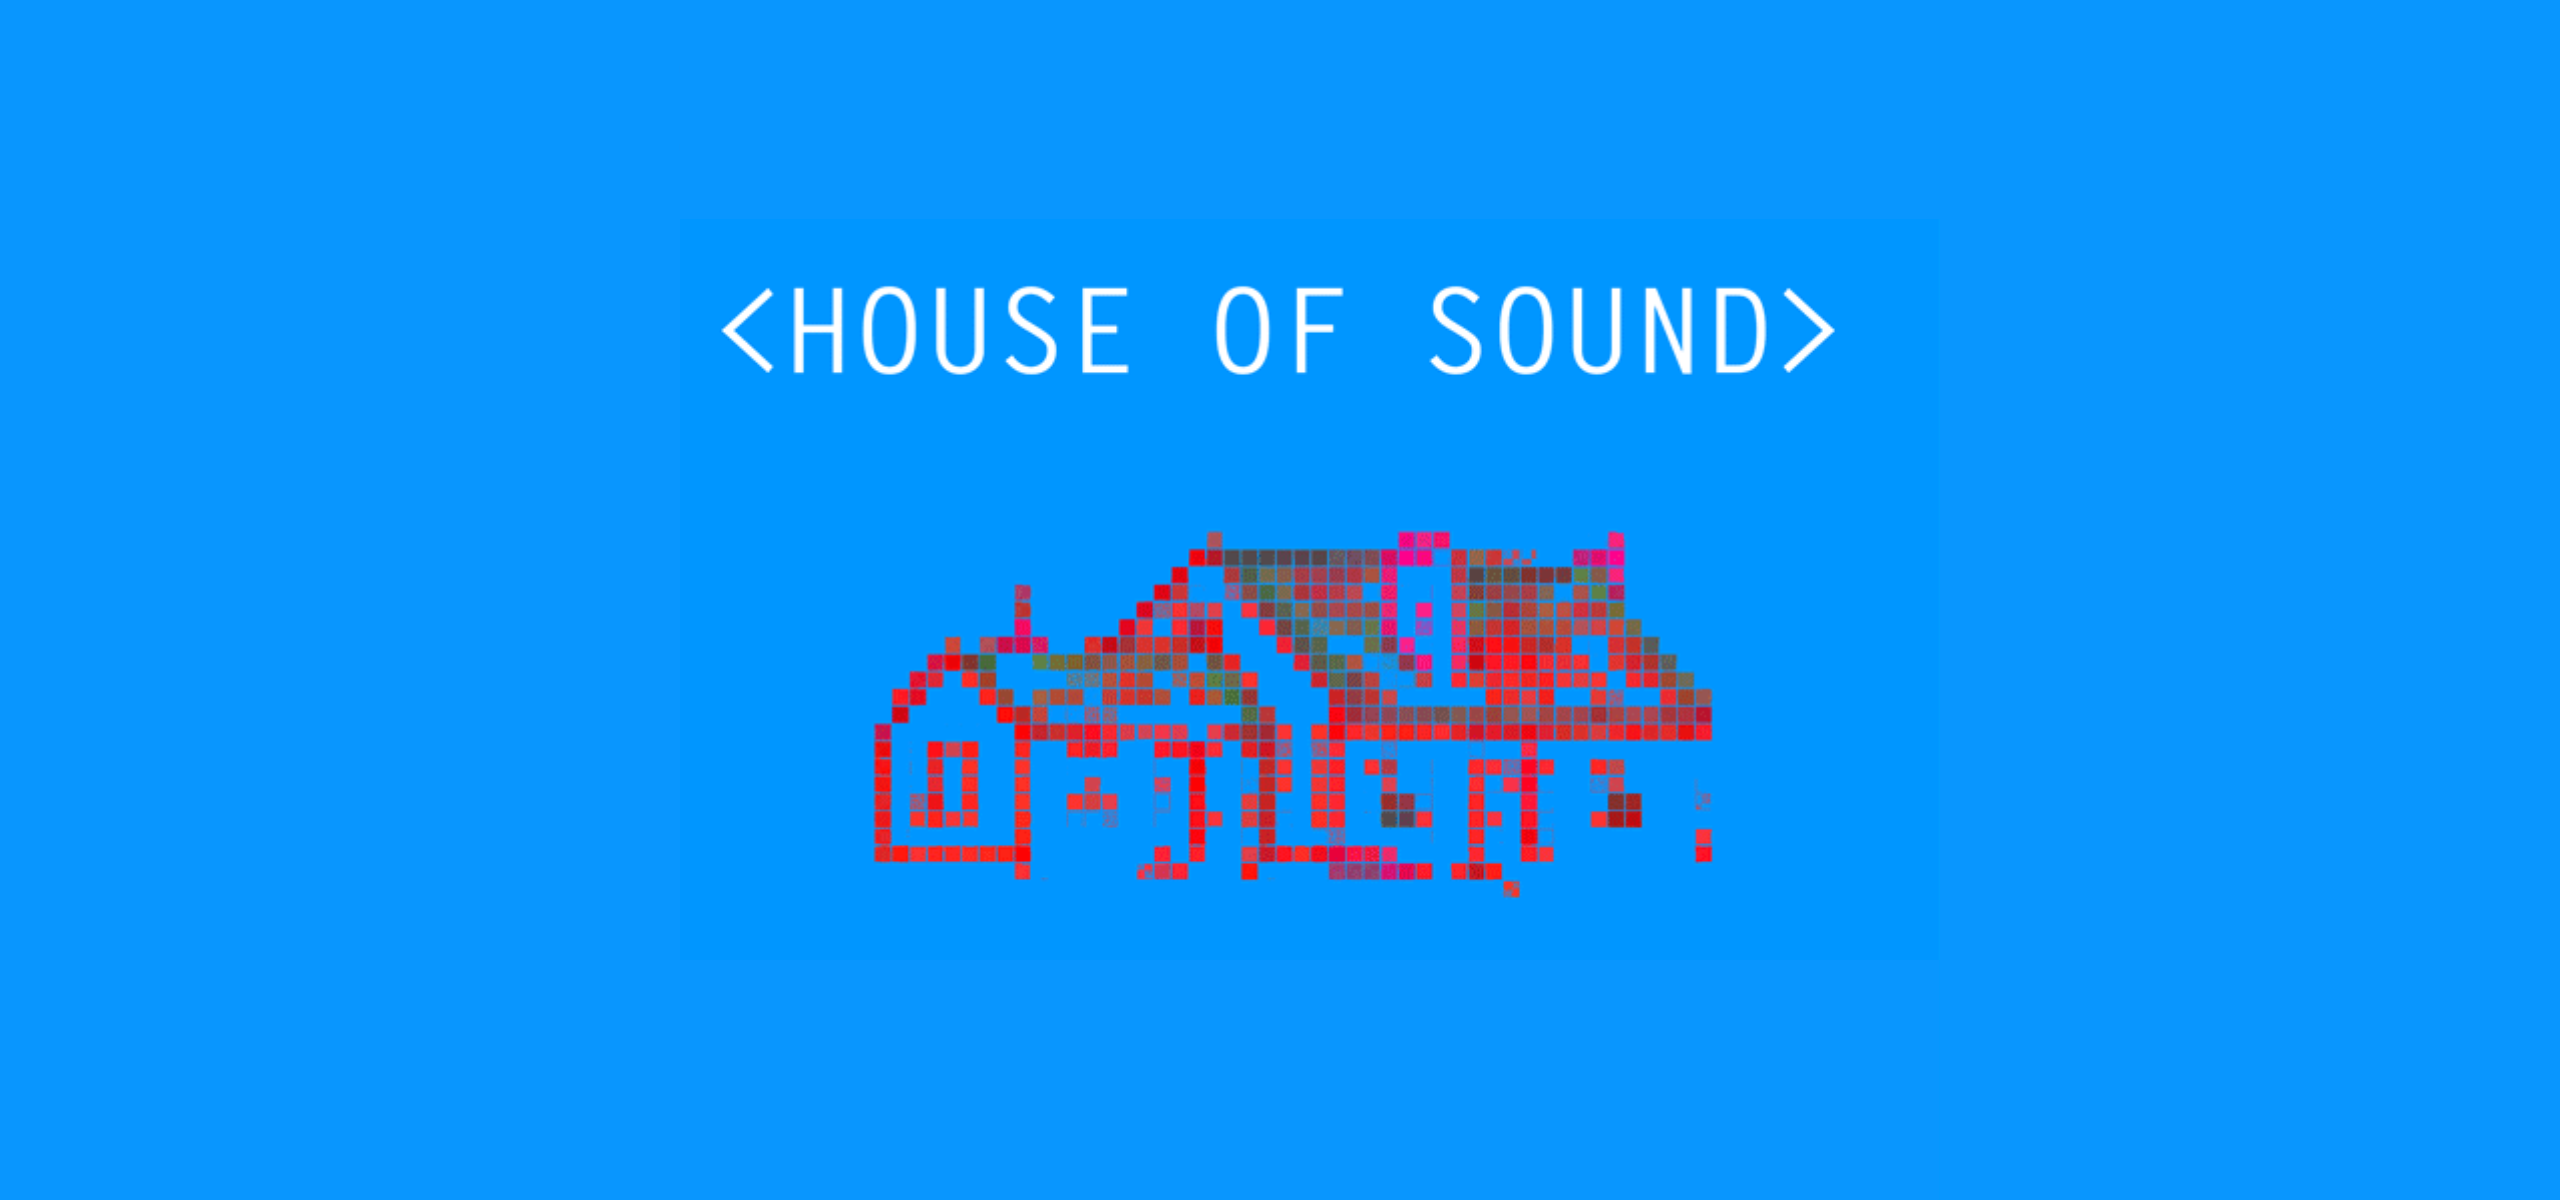 Graphic with text that reads "house of sound" with a digital house, all on a light blue background